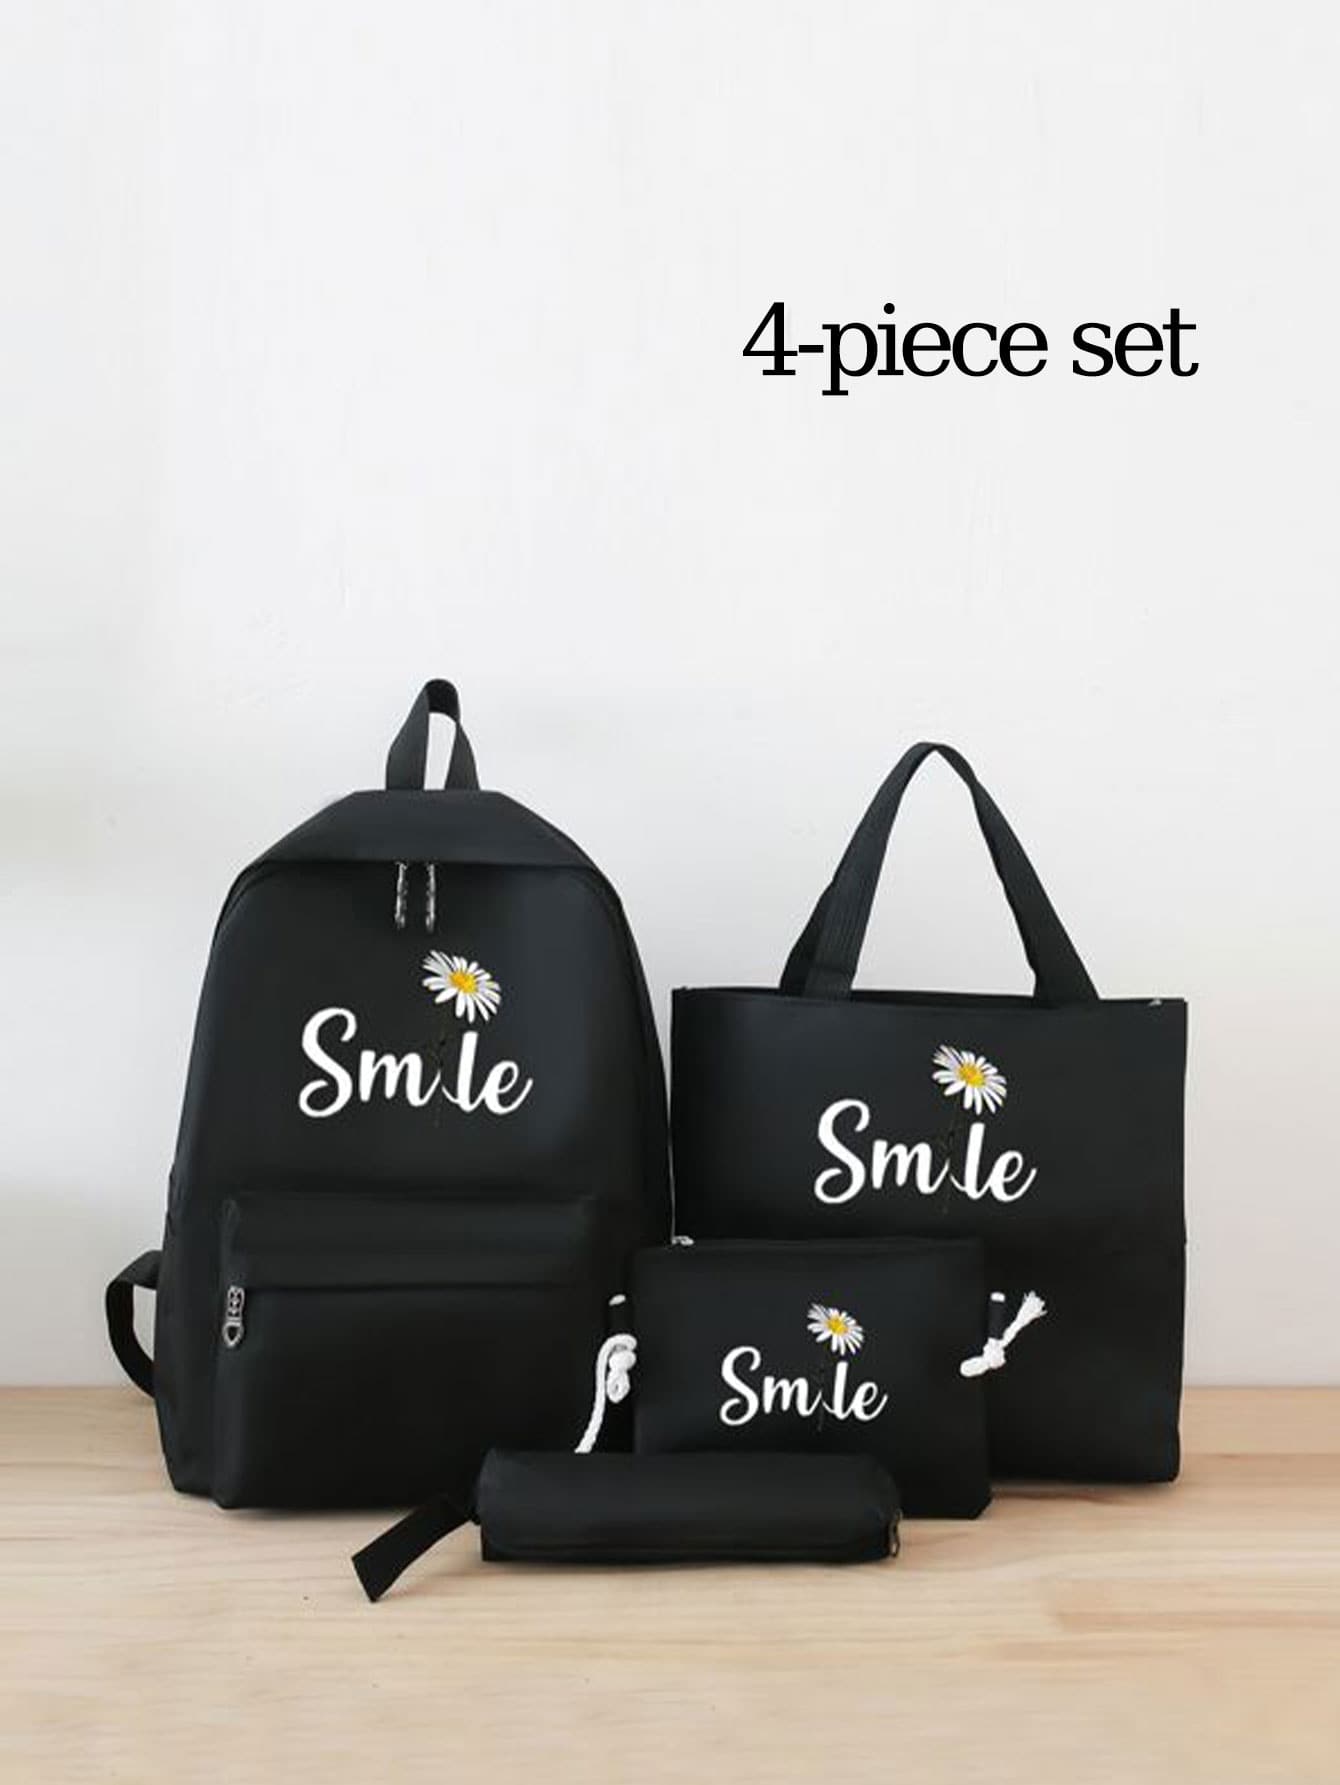 4pcs/set Classic Printed Female Casual Travel Backpacks With Large Capacity For Kids Schooling, Girls' Students' Bookbags, Preppy Style School Large Backpacks